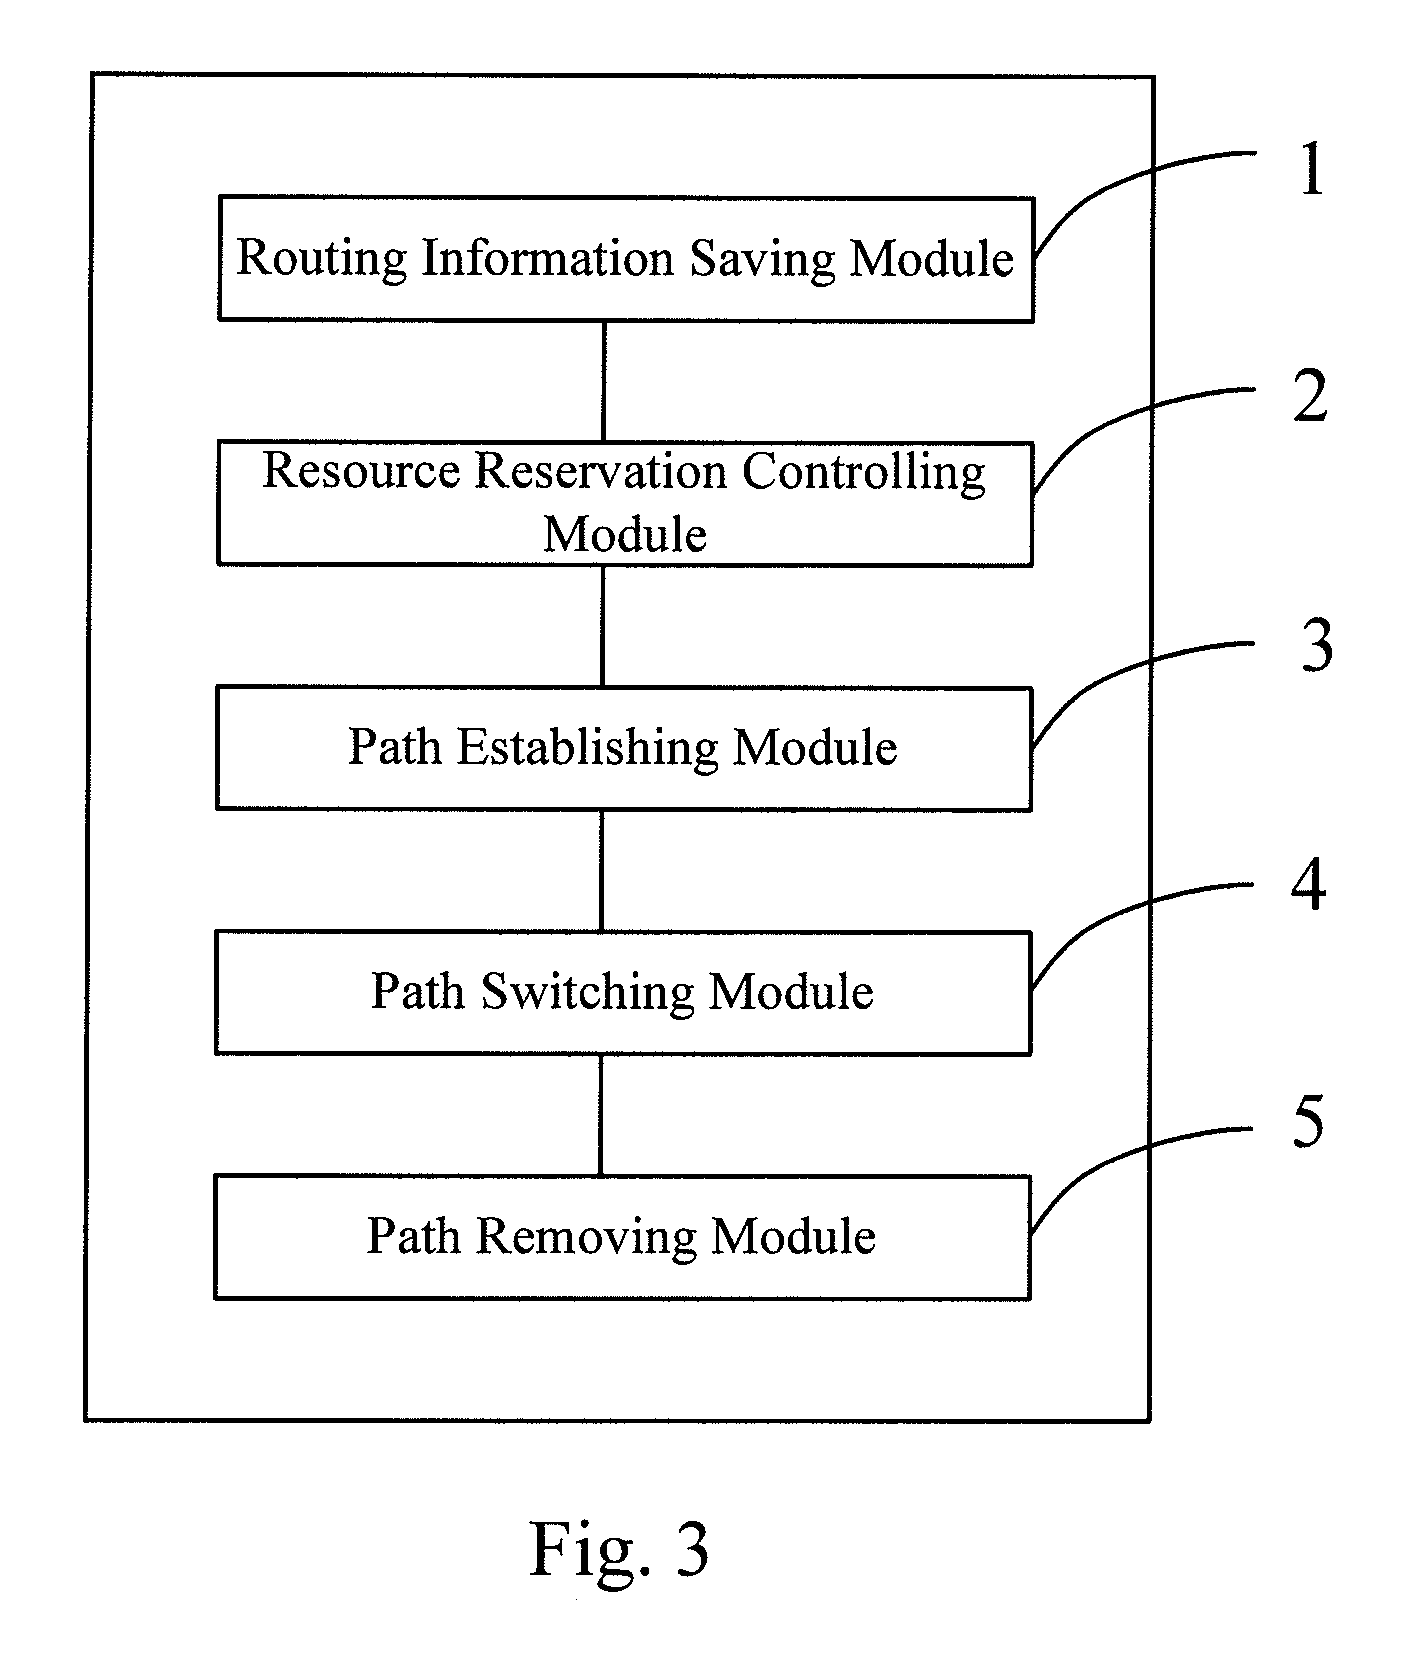 Method and device for recovering a shared mesh network